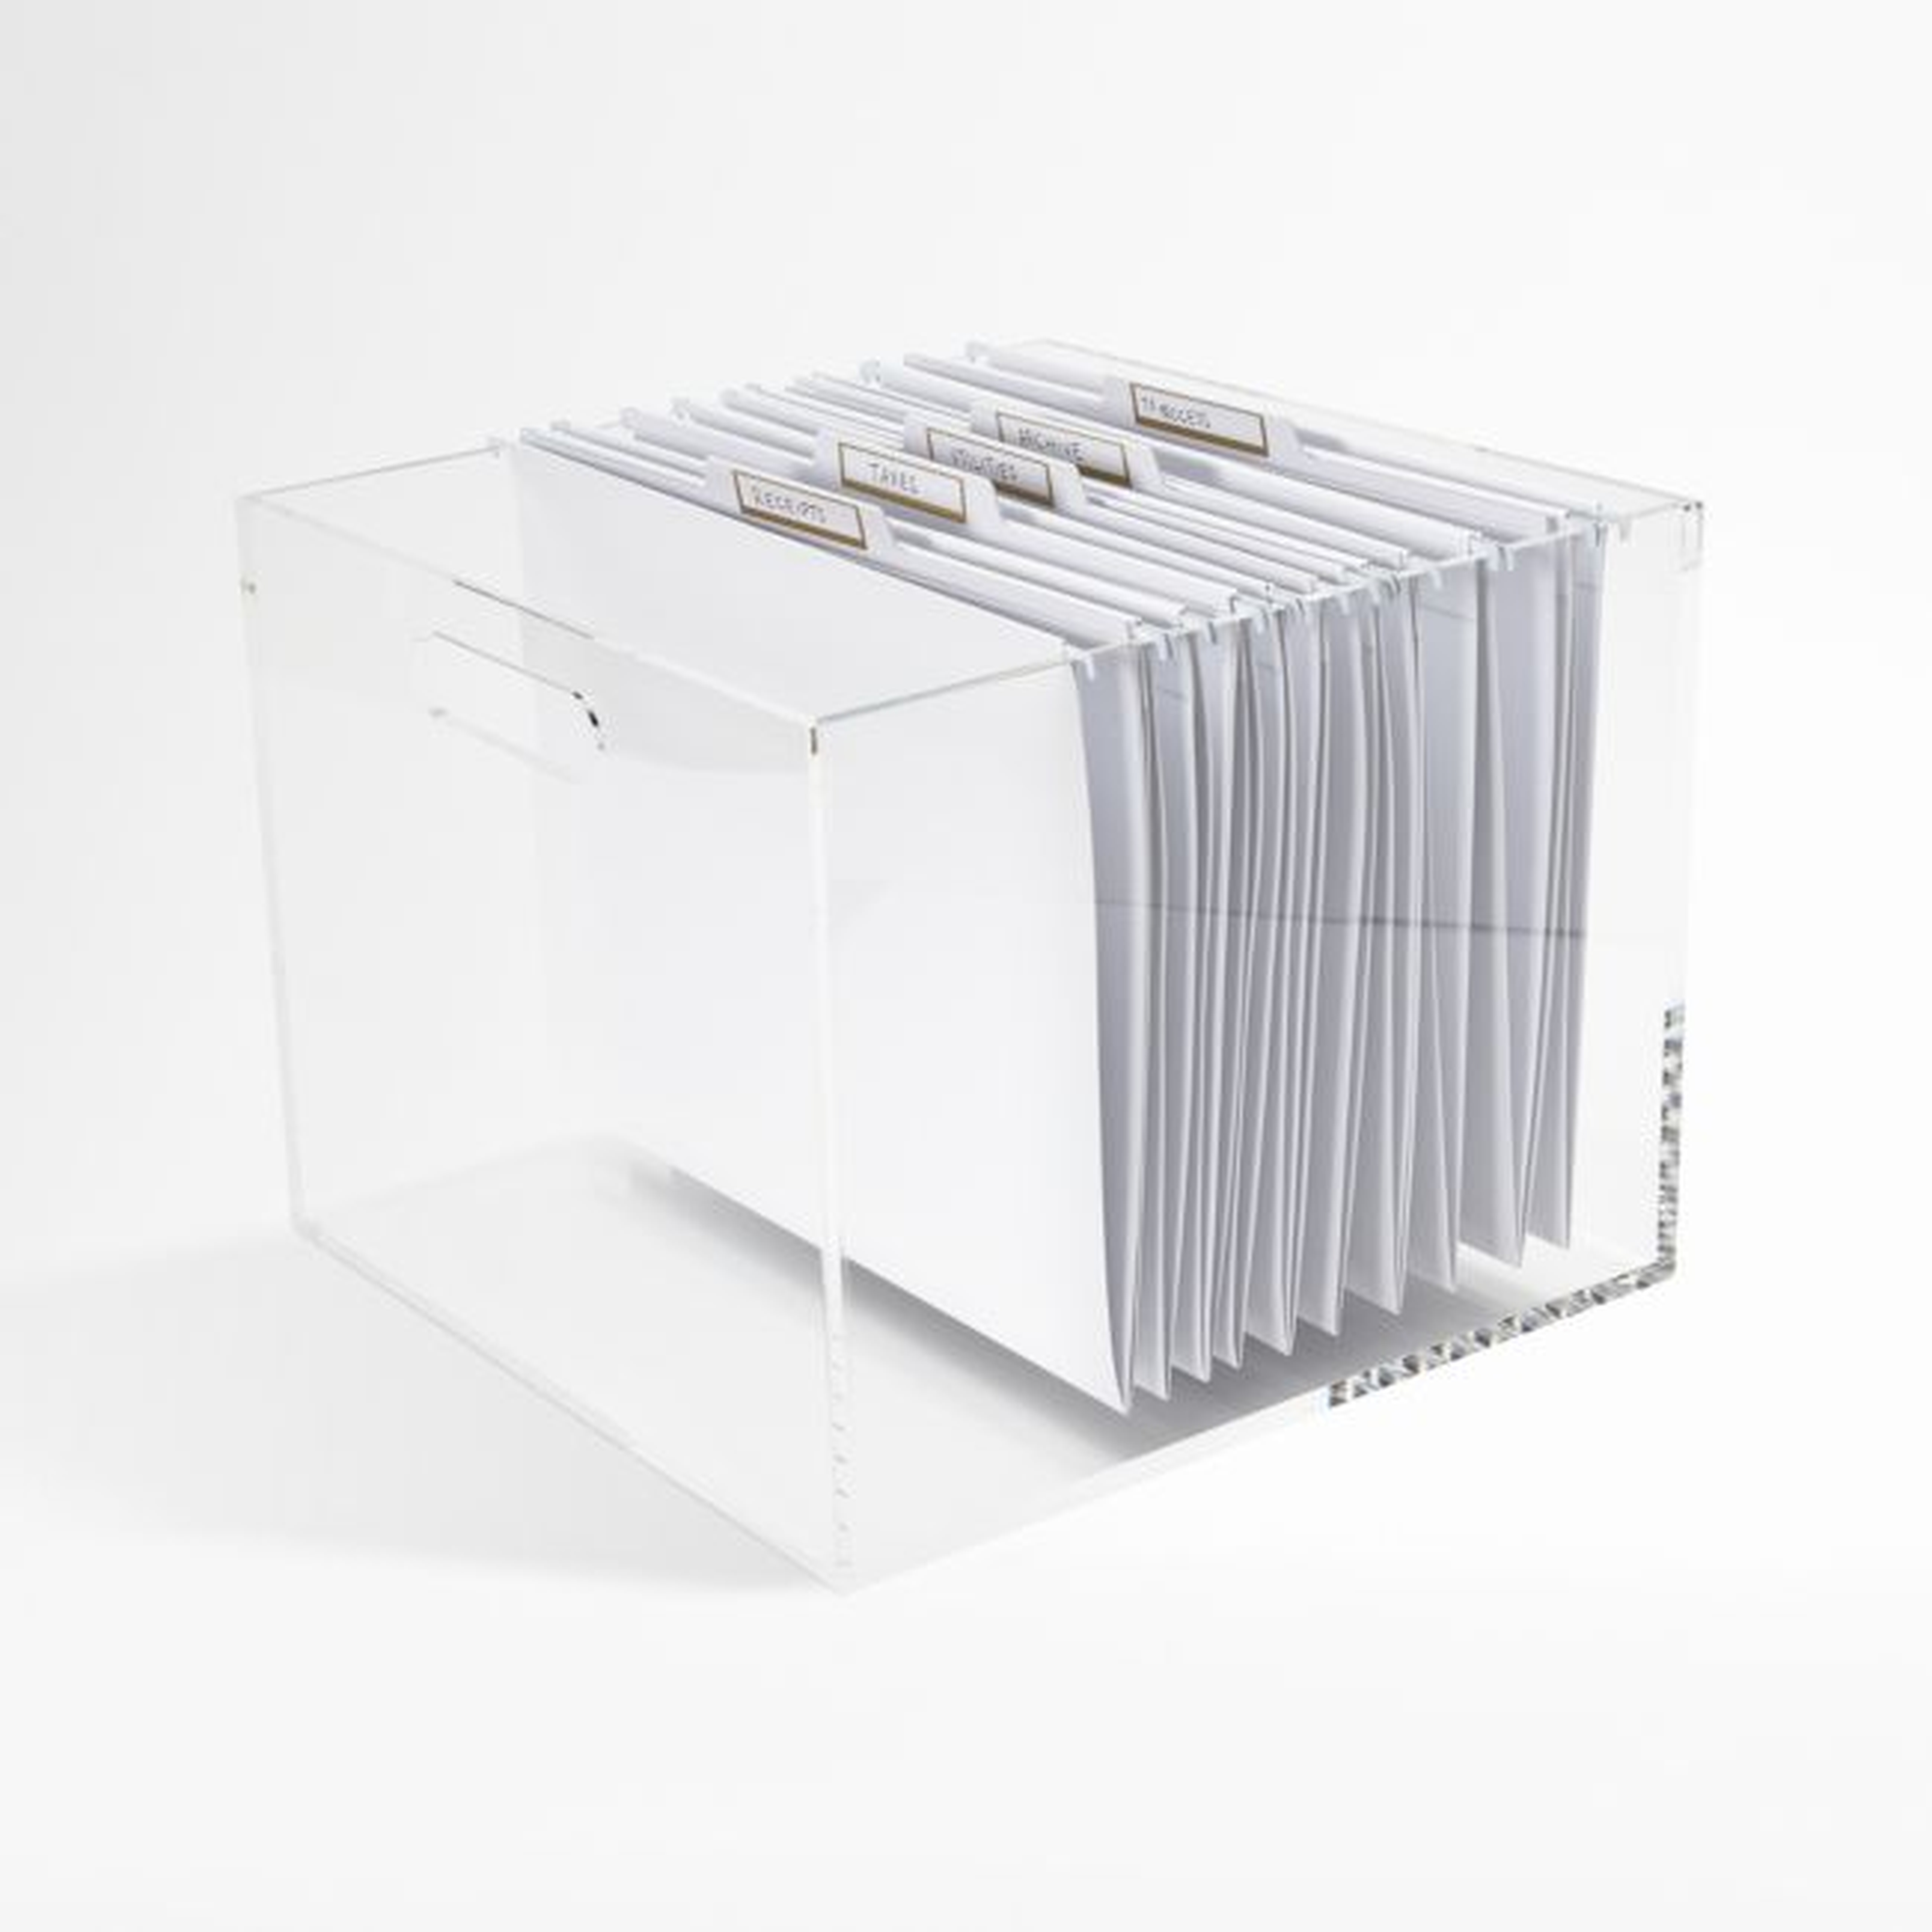 Russell + Hazel Acrylic File Box - Crate and Barrel